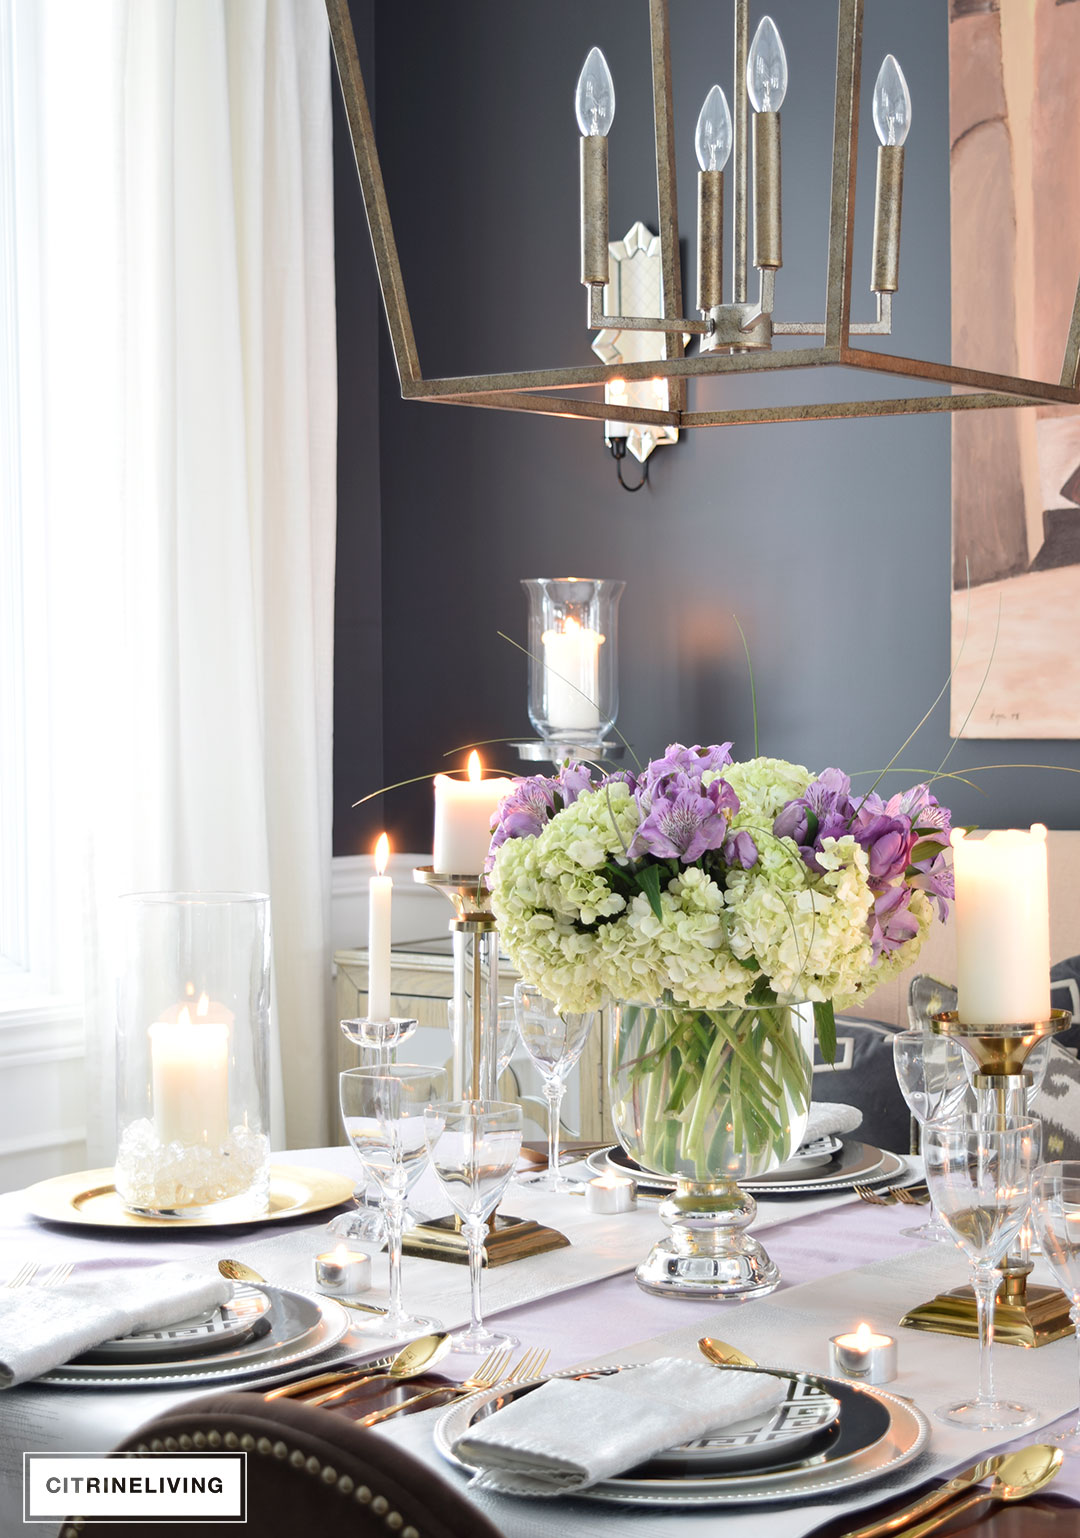 Lavender hues mixed with black and white, along with touches of metallics are a fresh take on a Valentine's Day tablescape for four.